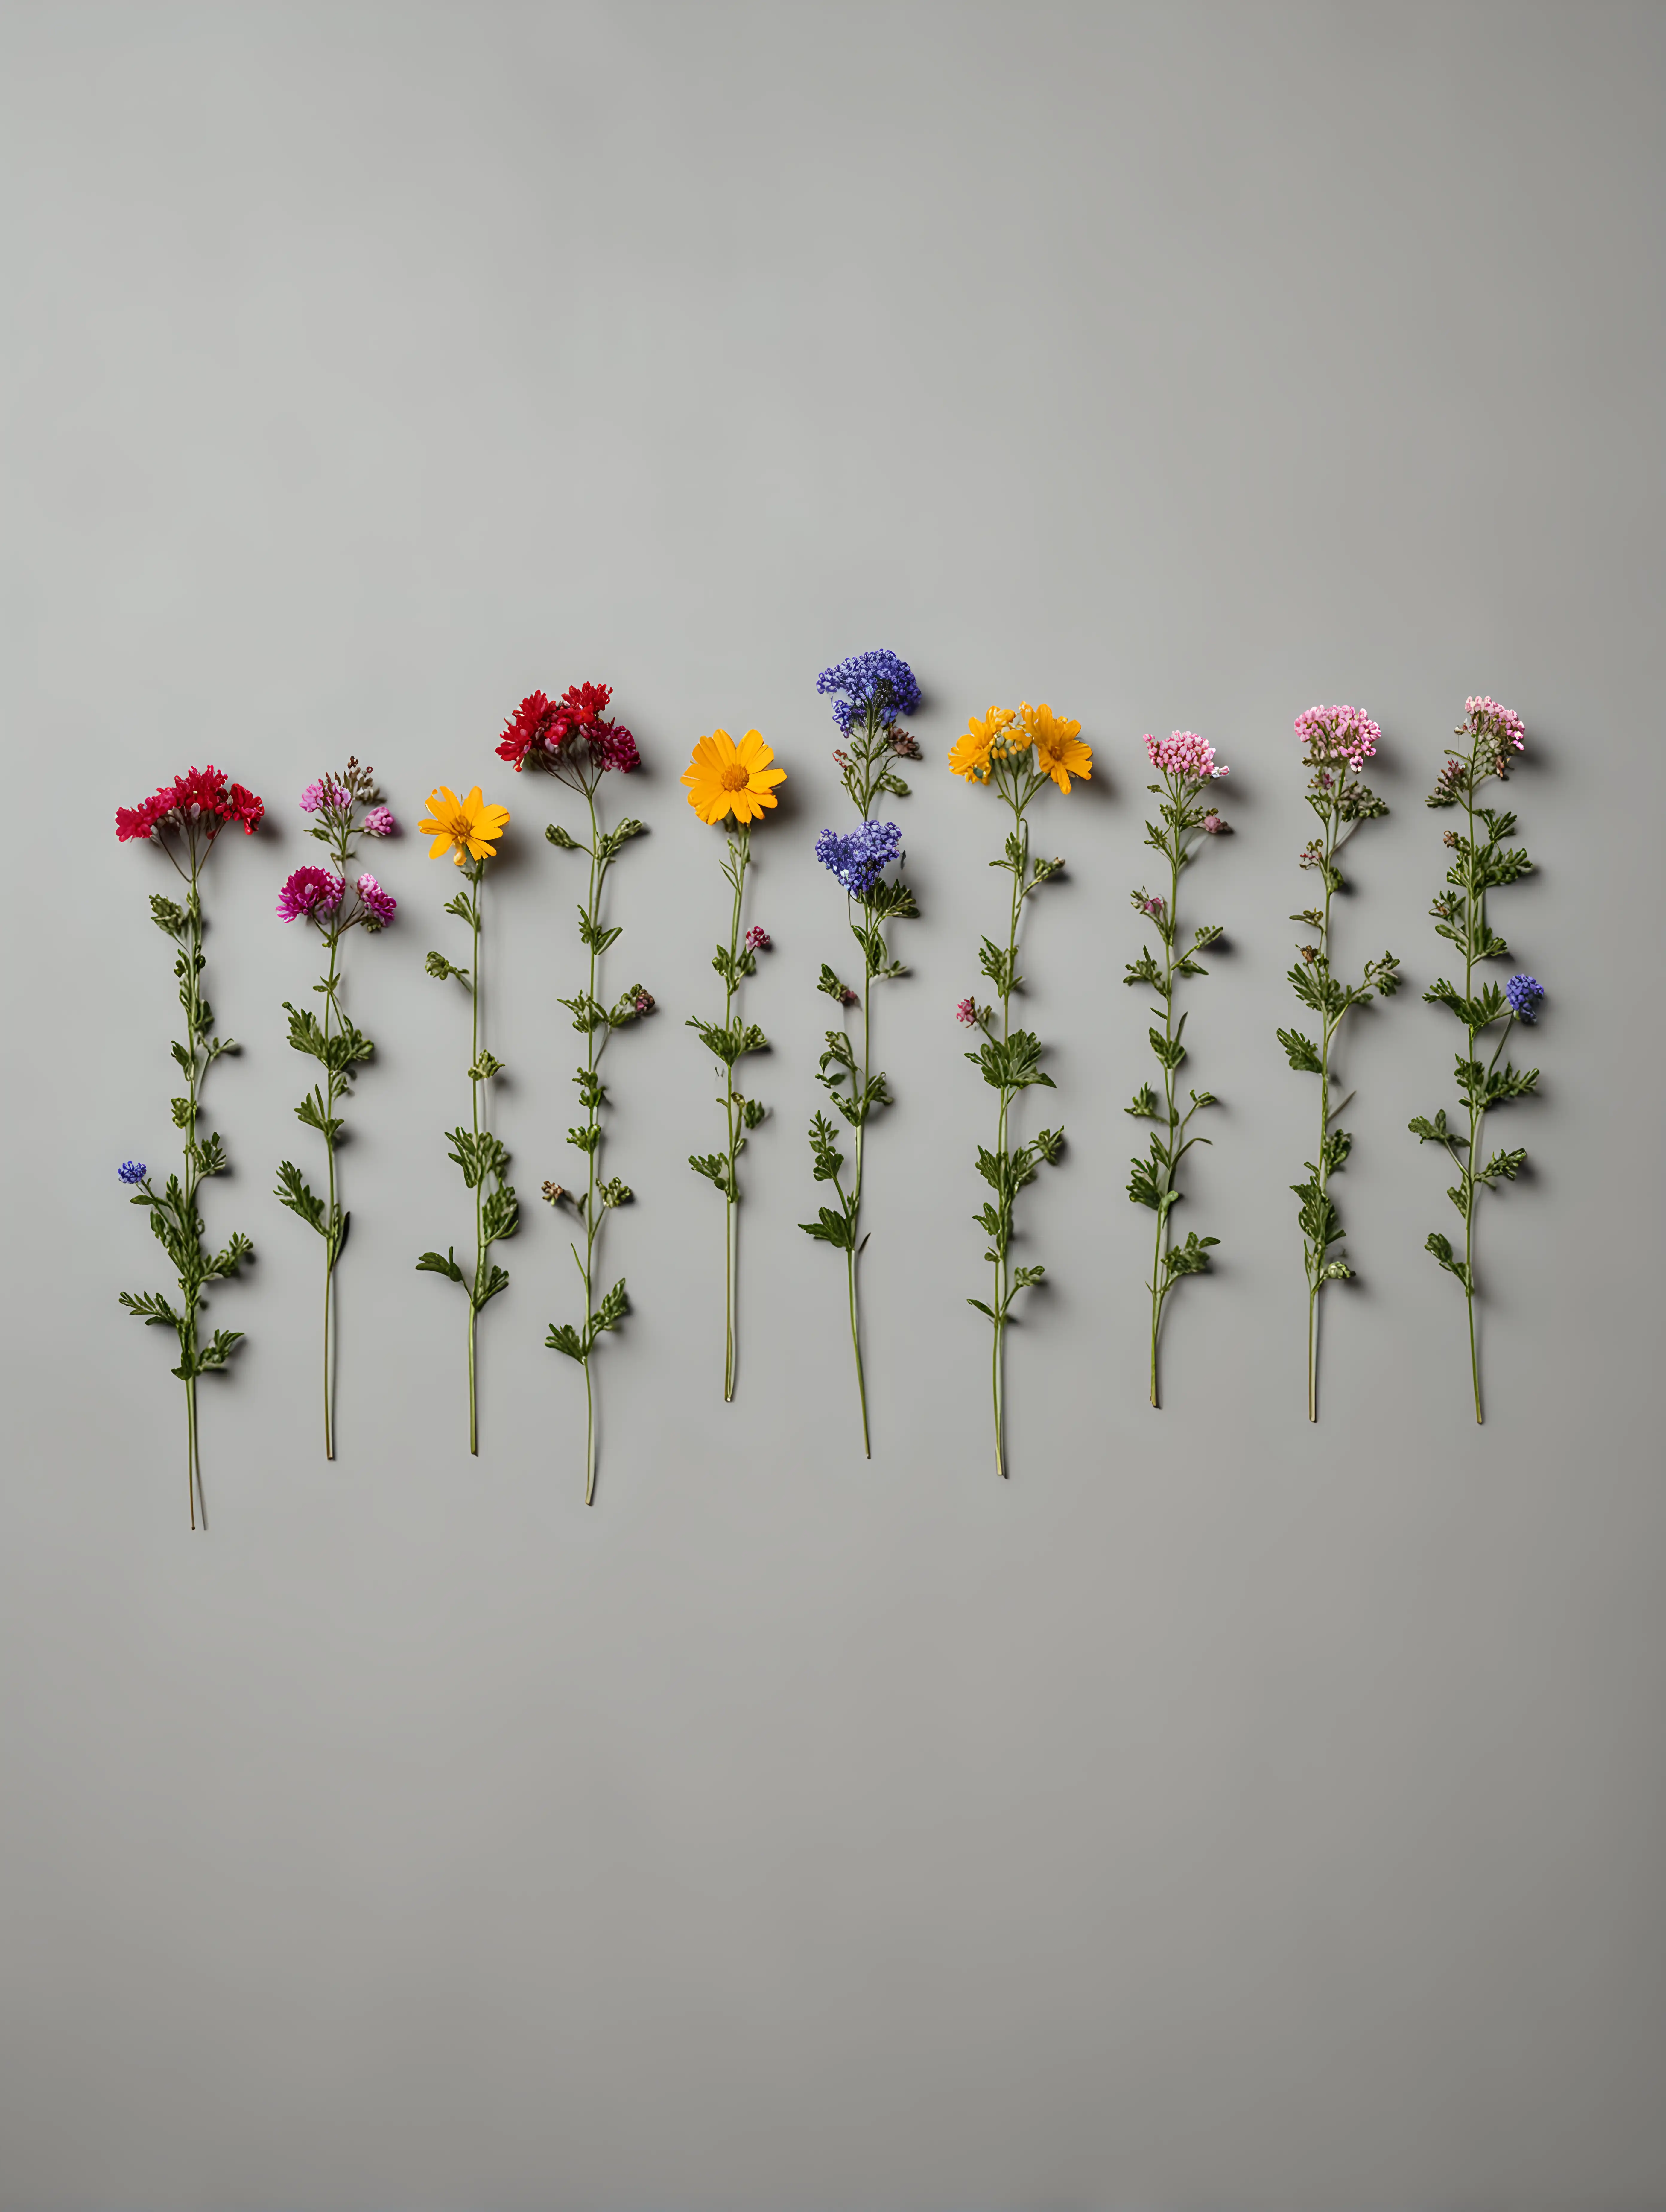 Colorful Wildflower Border on Neutral Gray Background